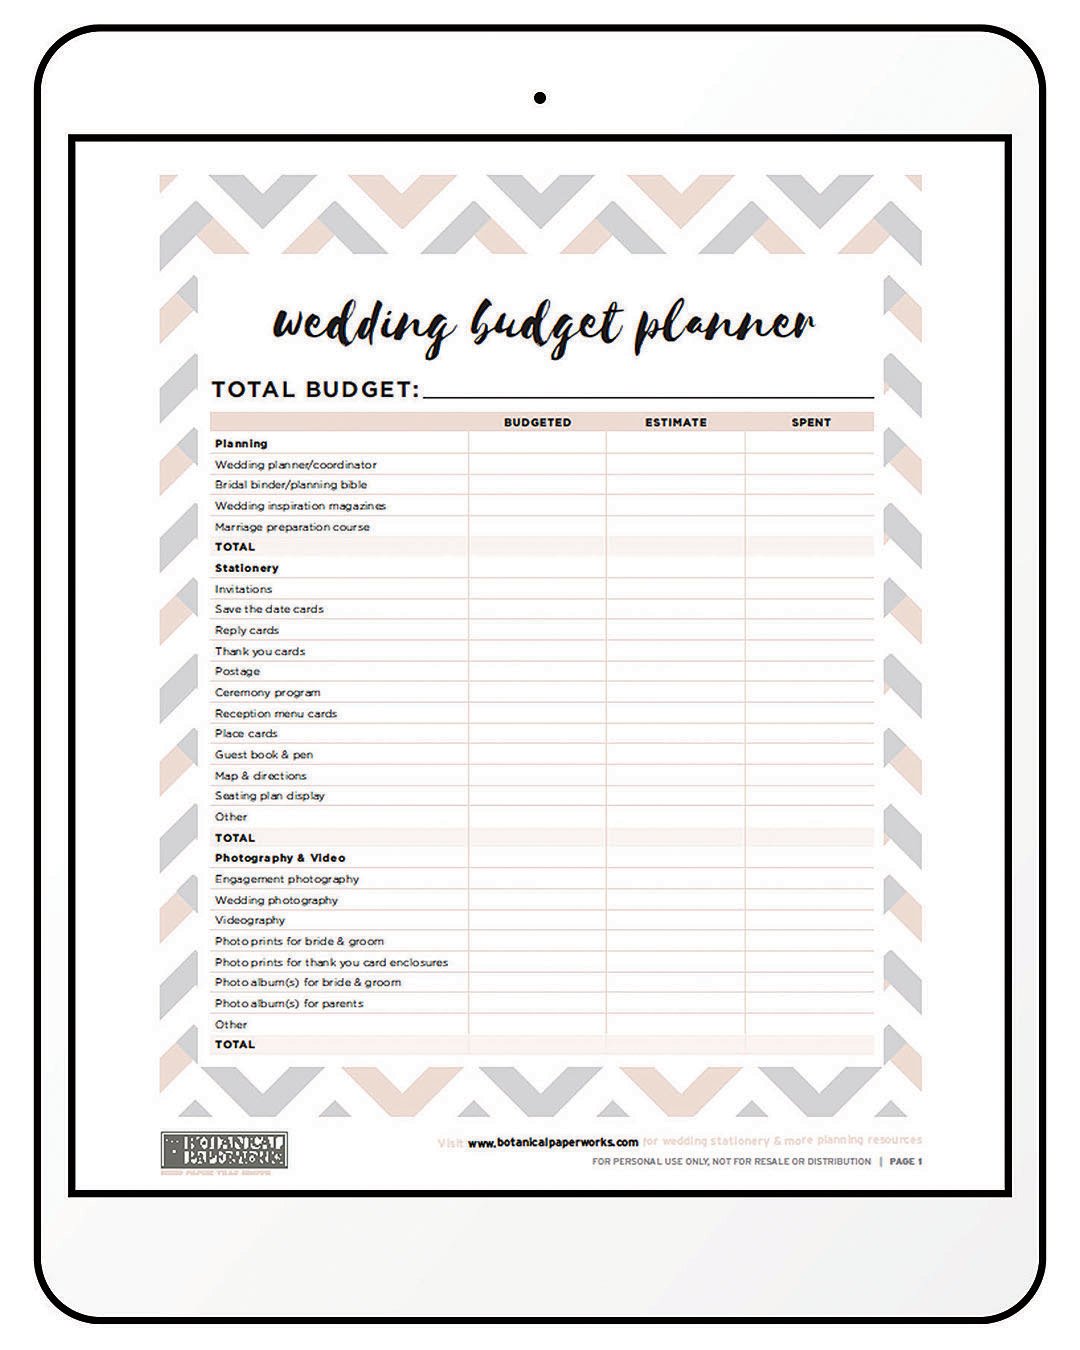 Wedding planner pdf free download remote control for windows 10 pc